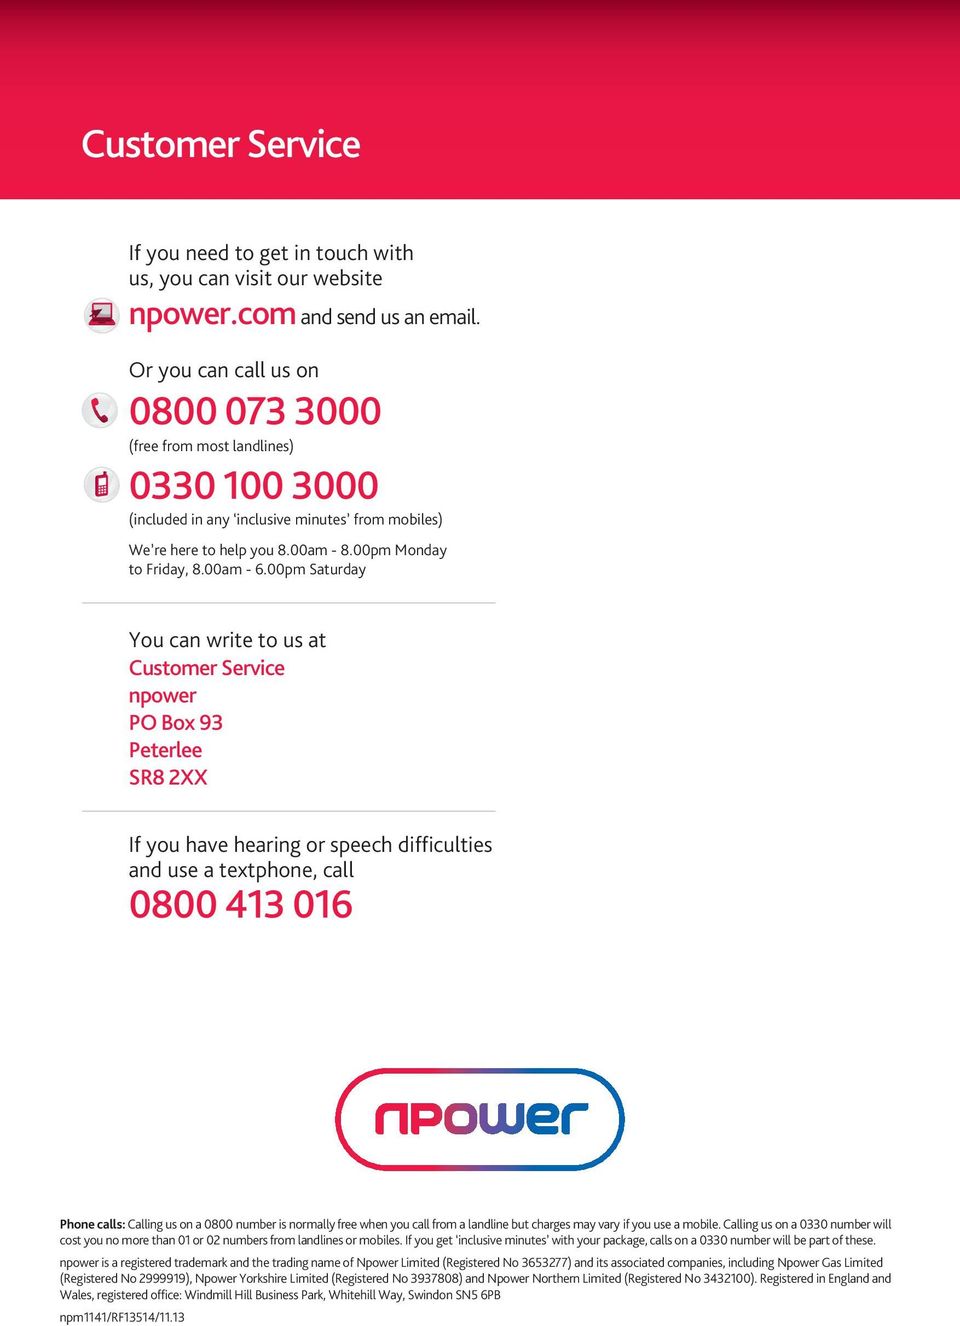 00pm Saturday You can write to us at Customer Service npower PO Box 93 Peterlee SR8 2XX If you have hearing or speech difficulties and use a textphone, call 0800 413 016 Phone calls: Calling us on a